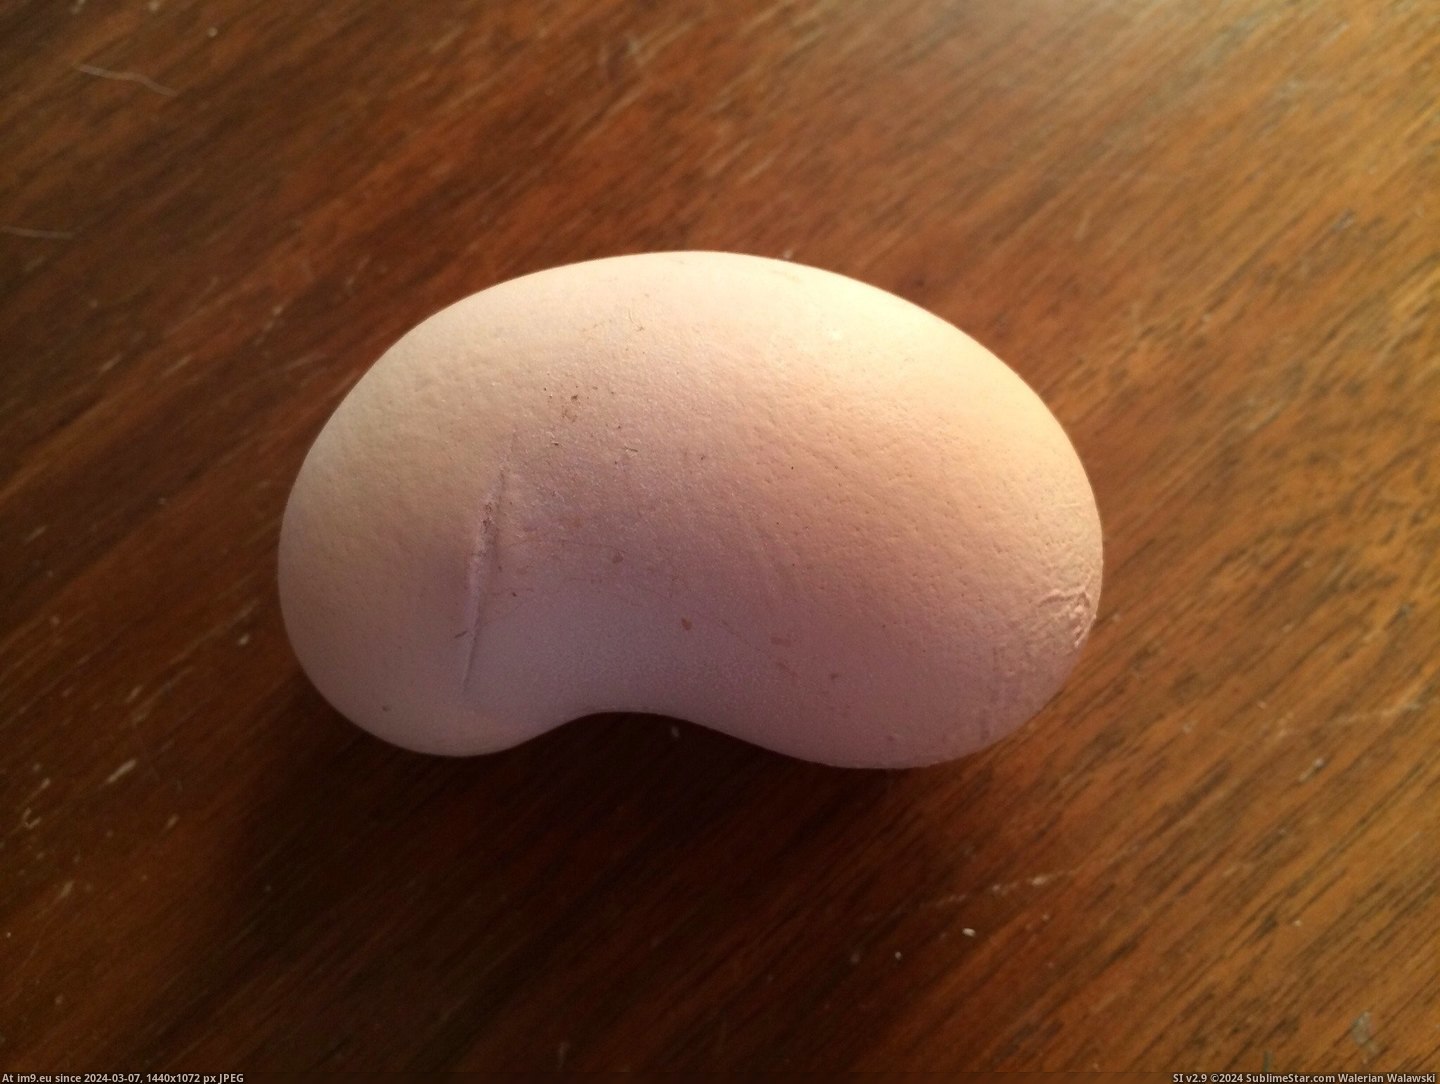 #One #Shaped #Chickens #Bean #Kidney #Egg #Laid [Mildlyinteresting] Today one of my chickens laid an egg shaped like a kidney bean. Pic. (Image of album My r/MILDLYINTERESTING favs))